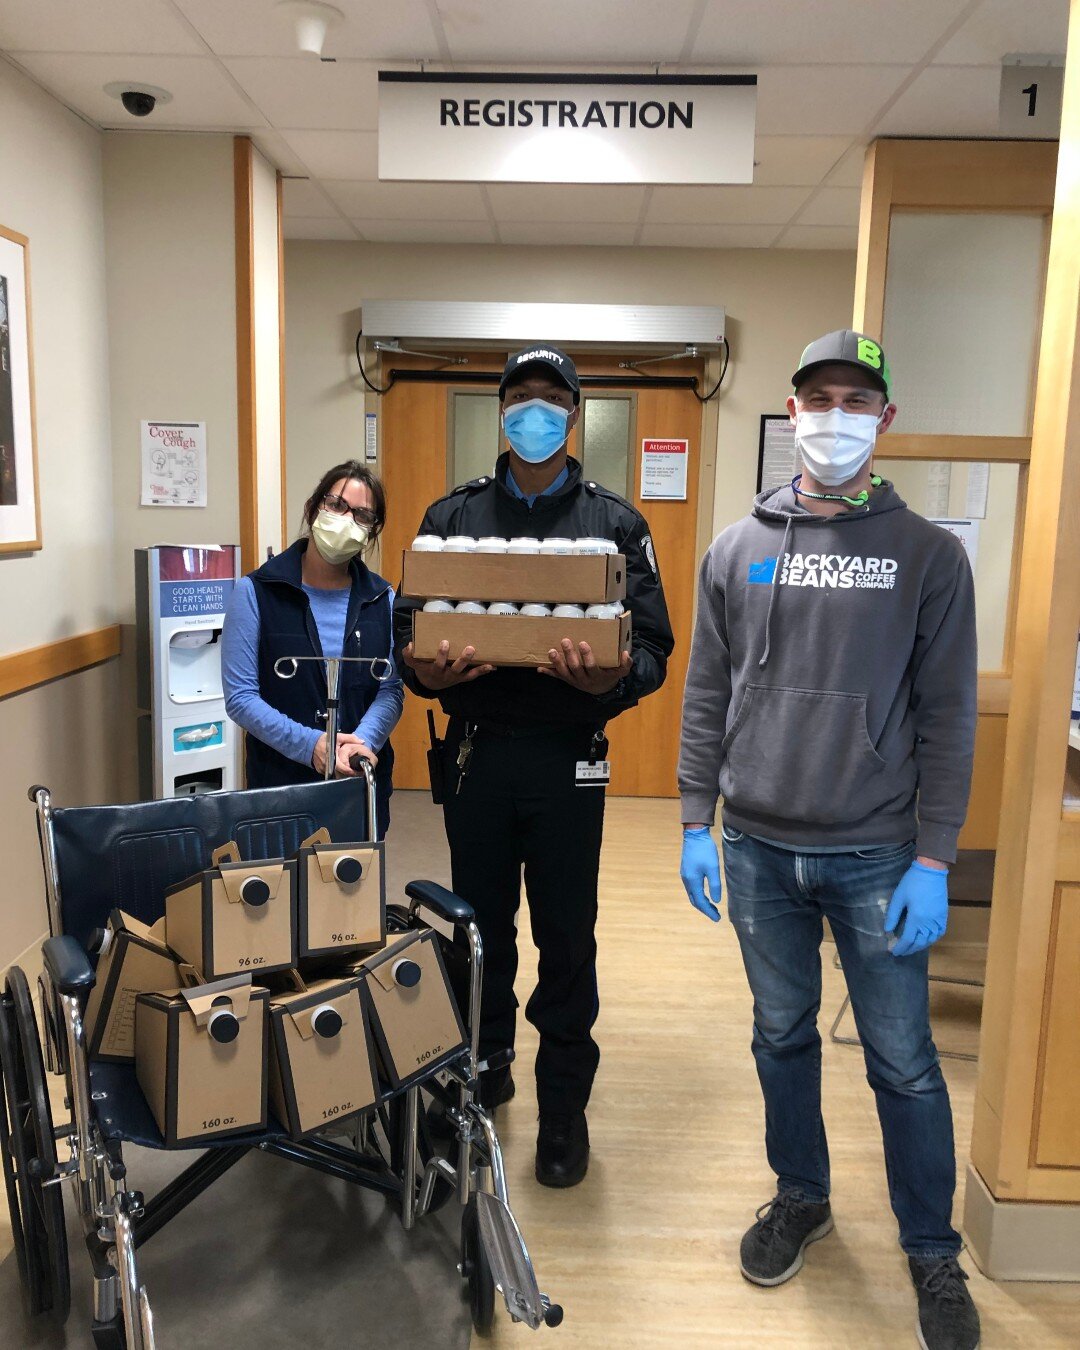 Image of Matthew Adams with coffee donations inside Hospital.